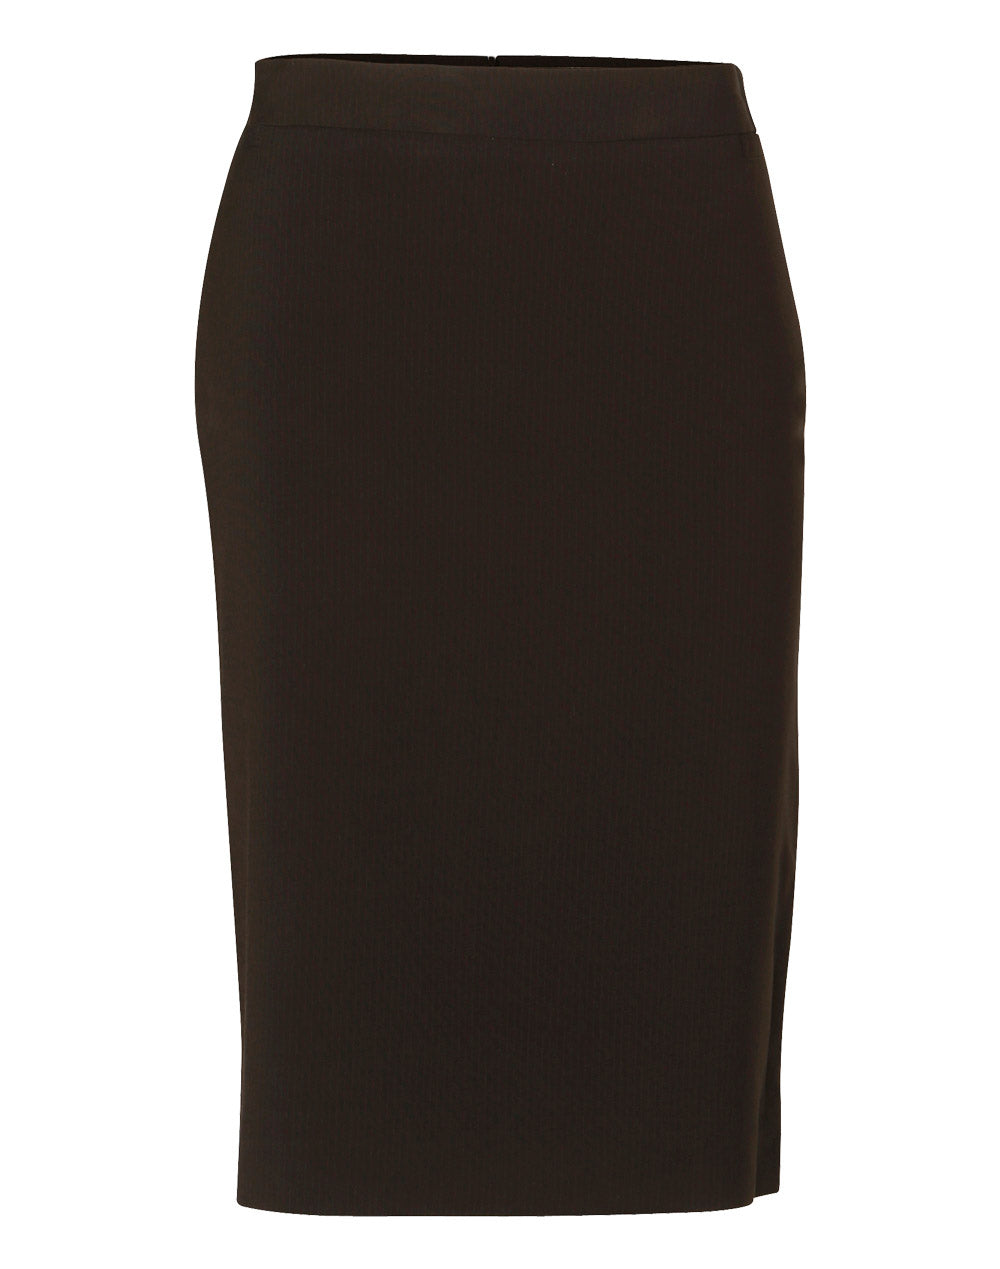 [M9472] Women's Mid Length Lined Pencil Skirt in Poly/Viscose Stretch Stripe